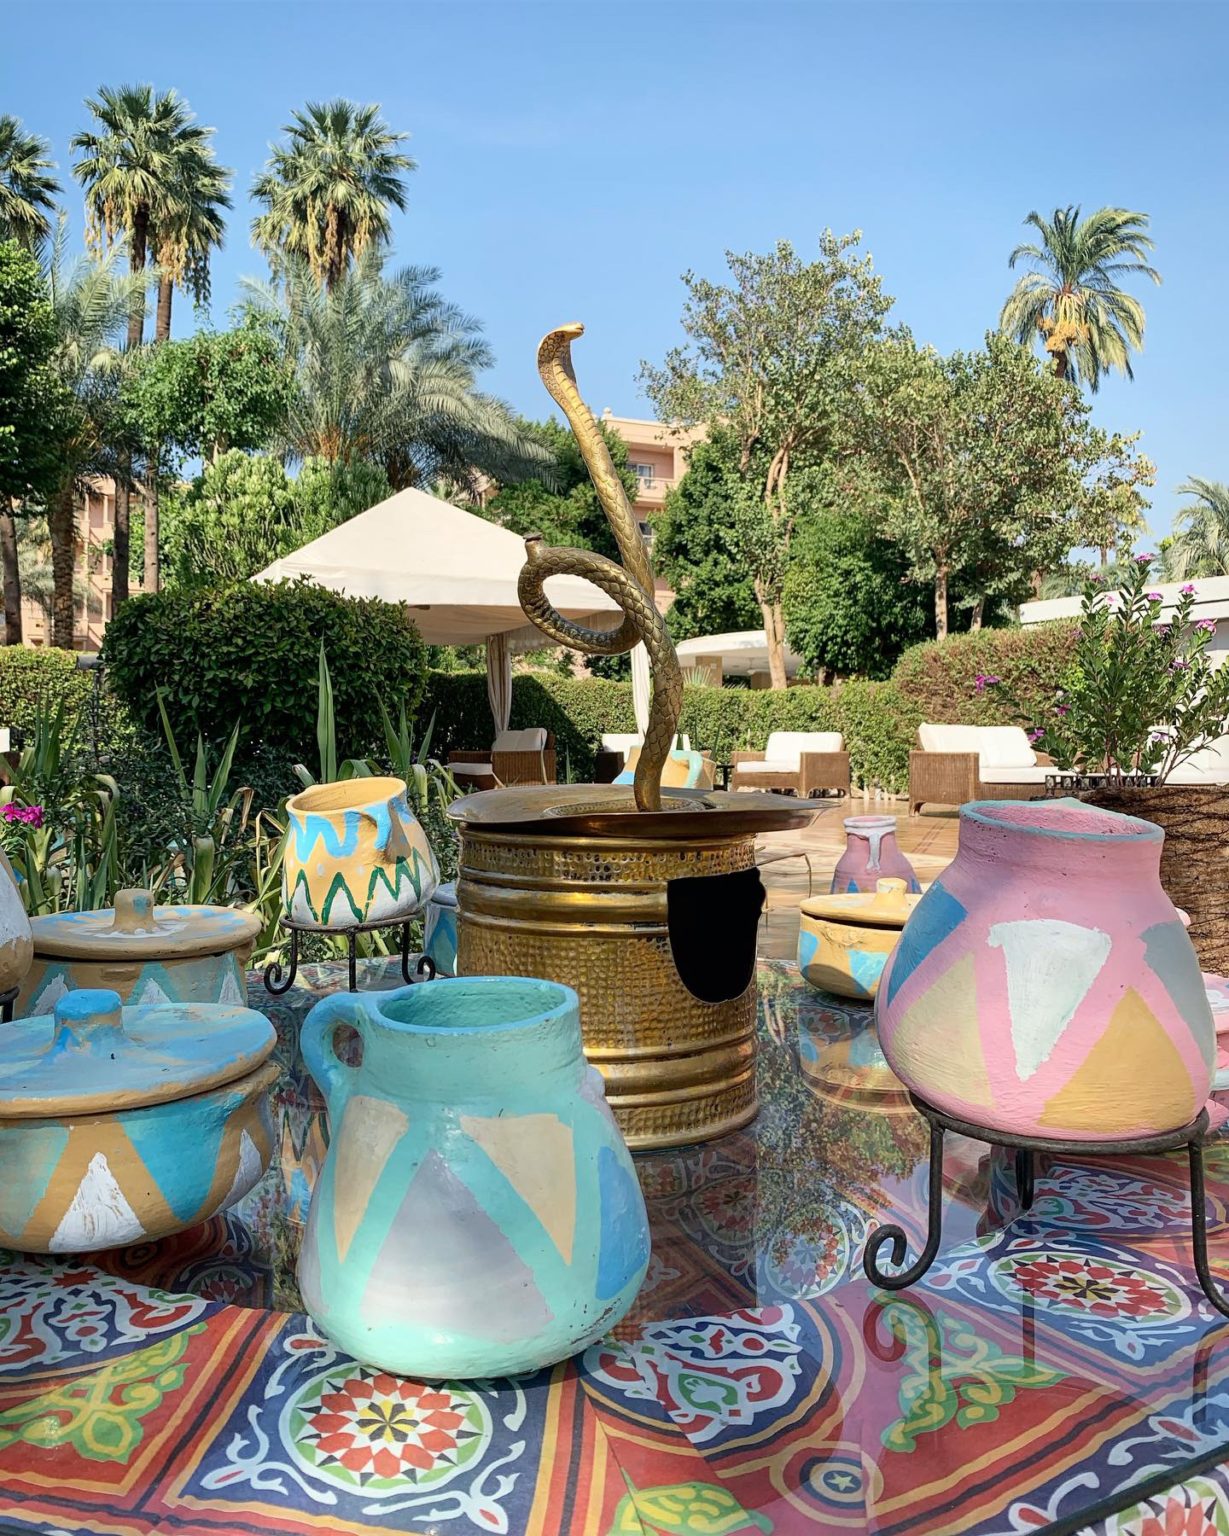 Local art and ceramics at Winter Palace Hotel Luxor